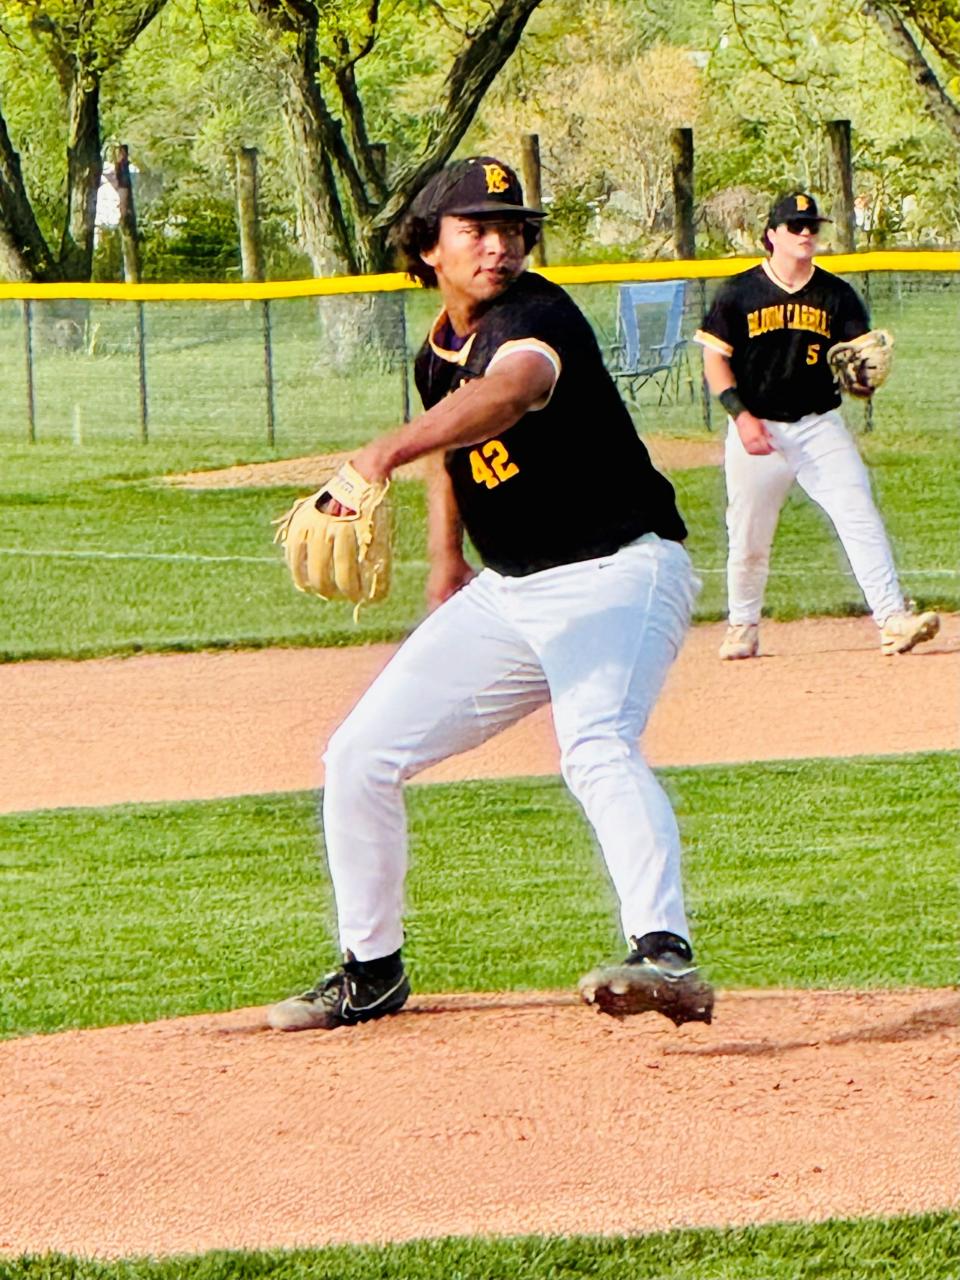 Bloom-Carroll junior pitcher Markus Roberson gets set to deliver the ball during a recent game against Logan Elm. Roberson continues to shine despite a knee injury that kept him out of action at the beginning of the season.